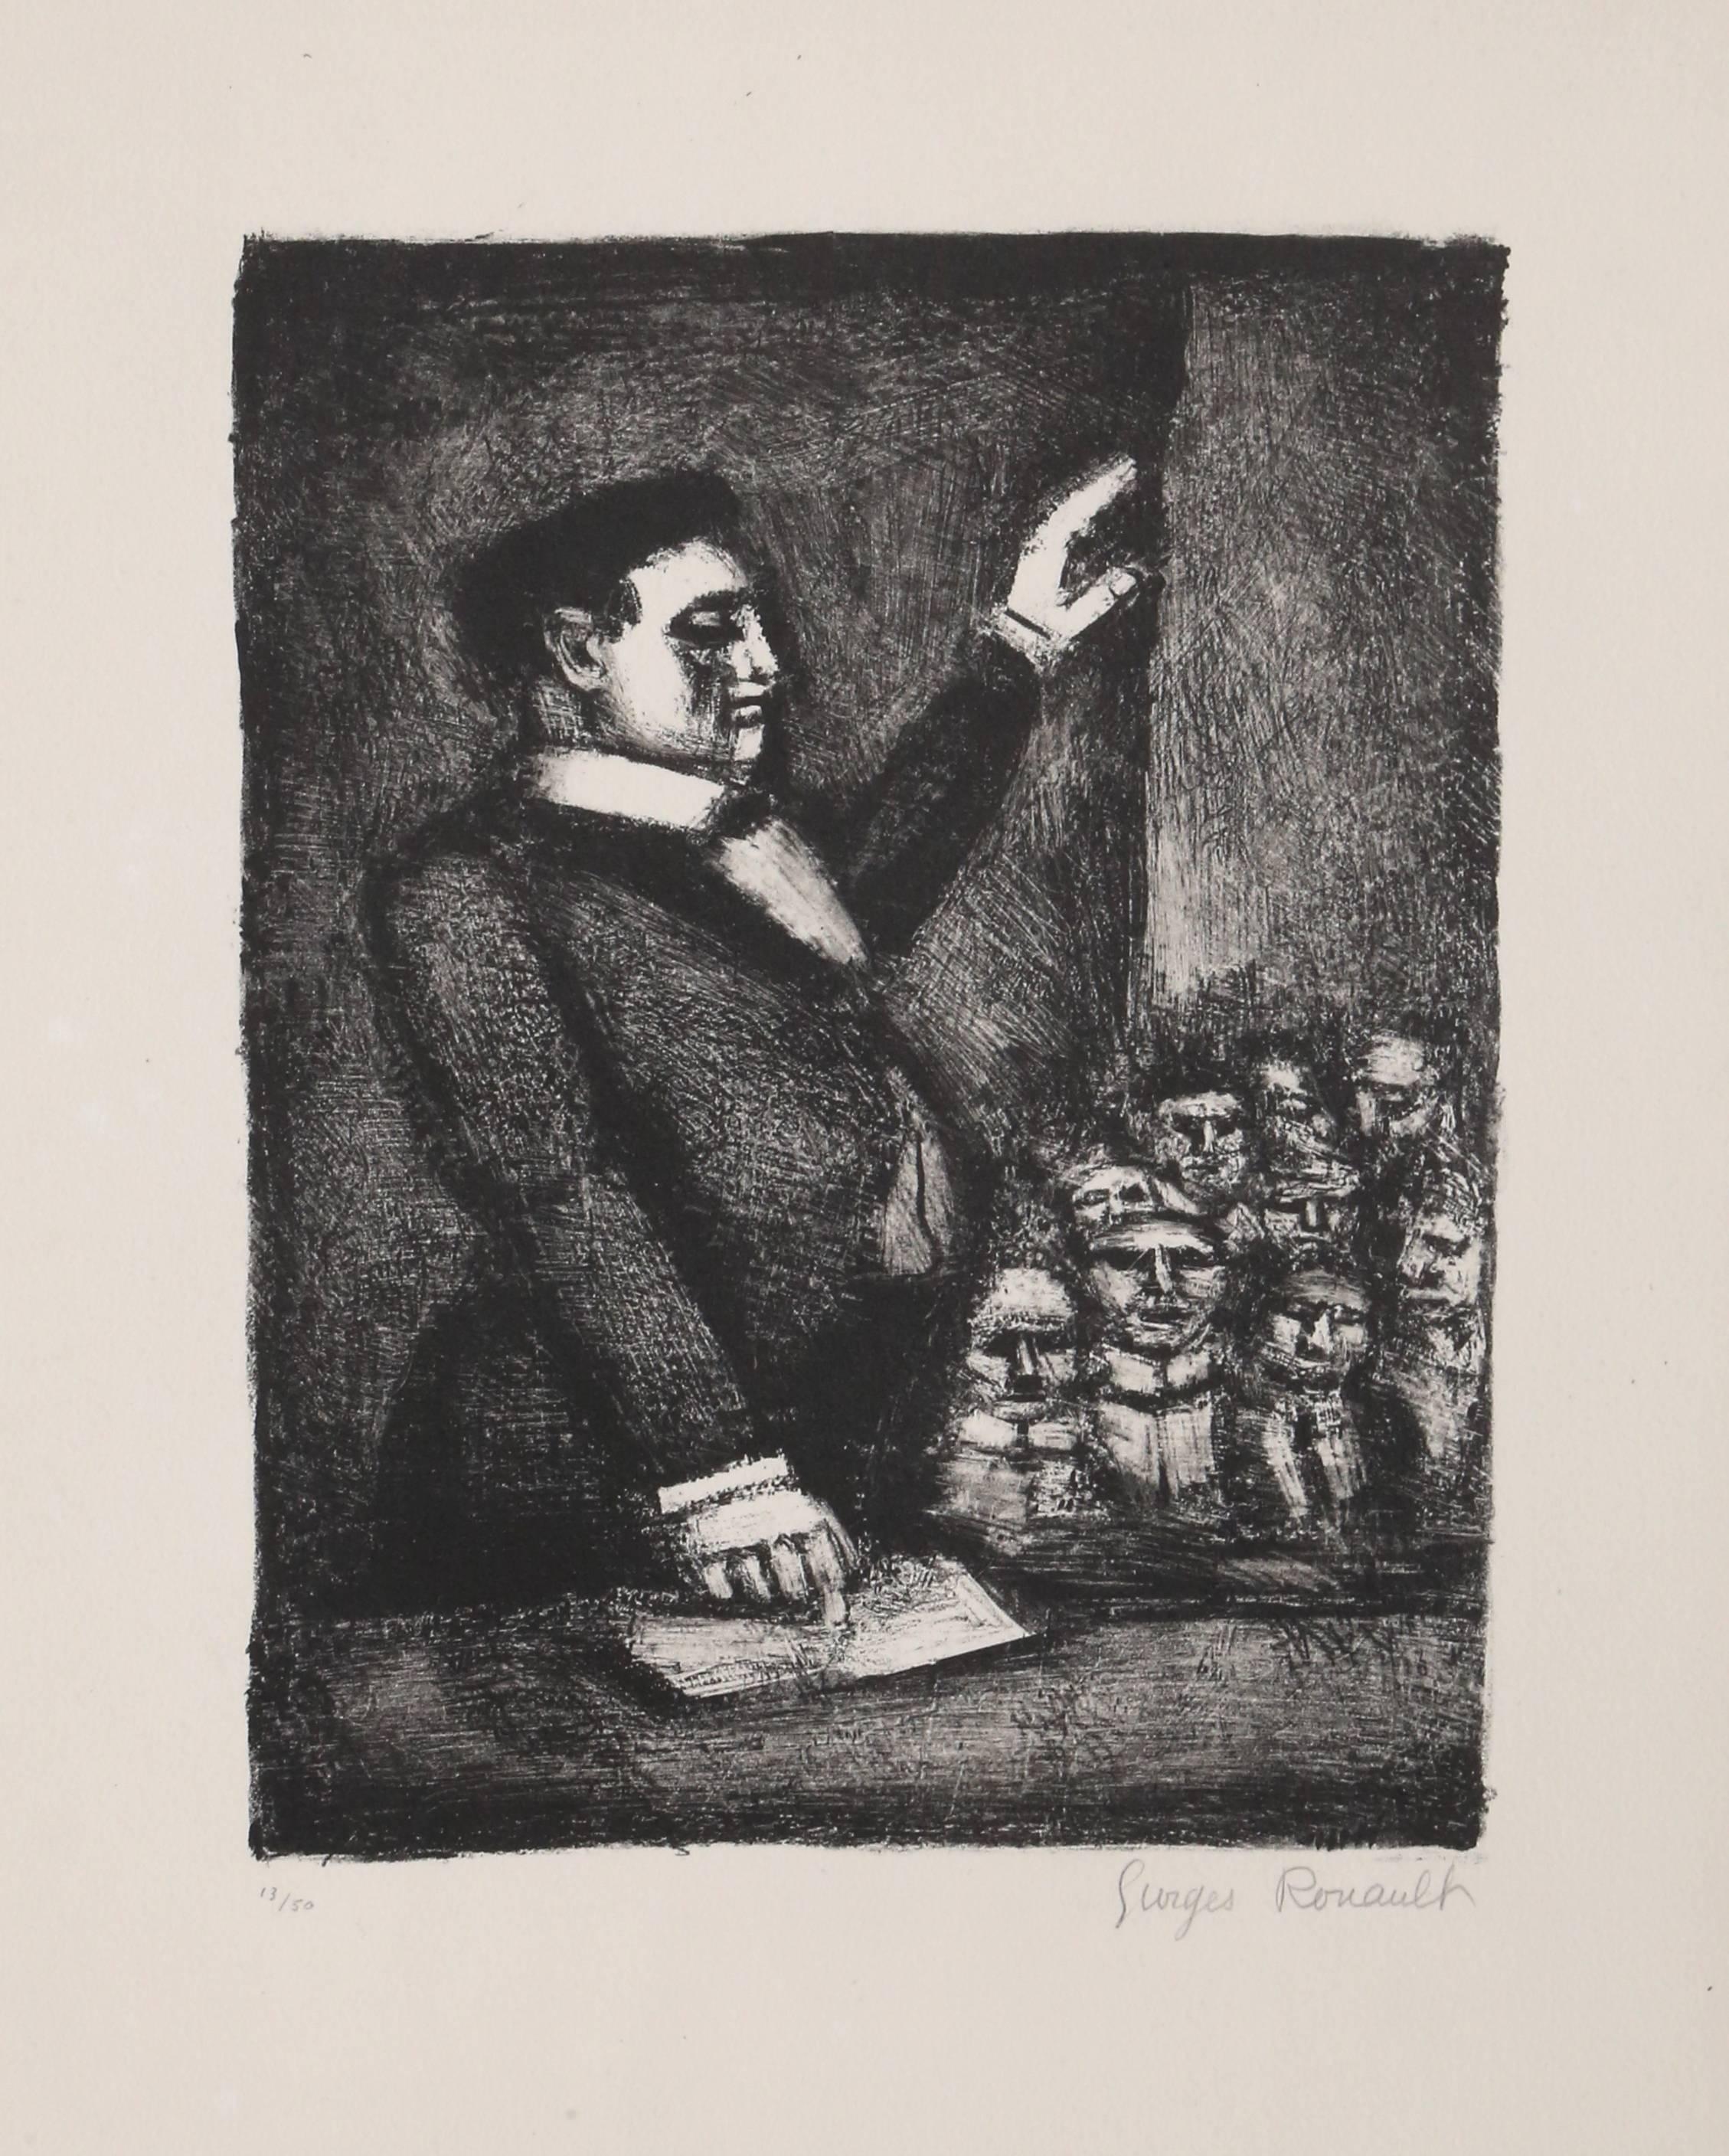 Artist: Georges Rouault 
Title: L'Orateur
Year: circa 1925 
Medium: Lithograph on ivory Japanese paper, signed and numbered in pencil
Edition: 13/50
Image: 11.5 x 8.5 inches
Size: 19.5  x 13 in. (49.53  x 33.02 cm)
Publisher: Edmond Frapier,